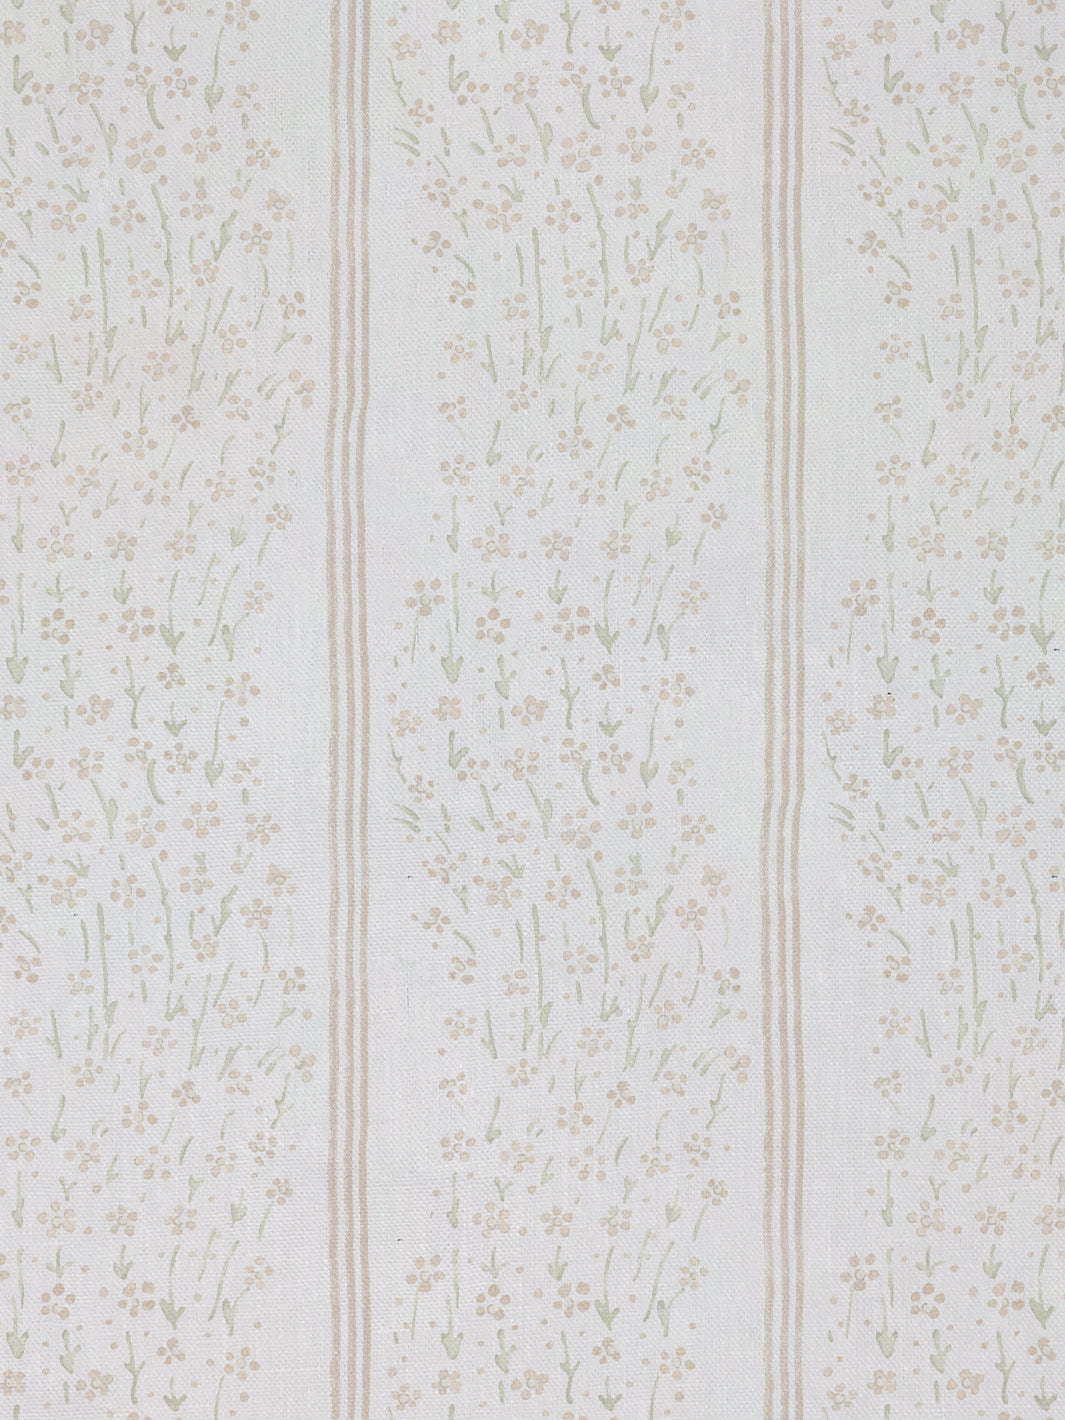 'Hillhouse Floral Ditsy Wave Stripe' Linen Fabric by Nathan Turner - Gold Green